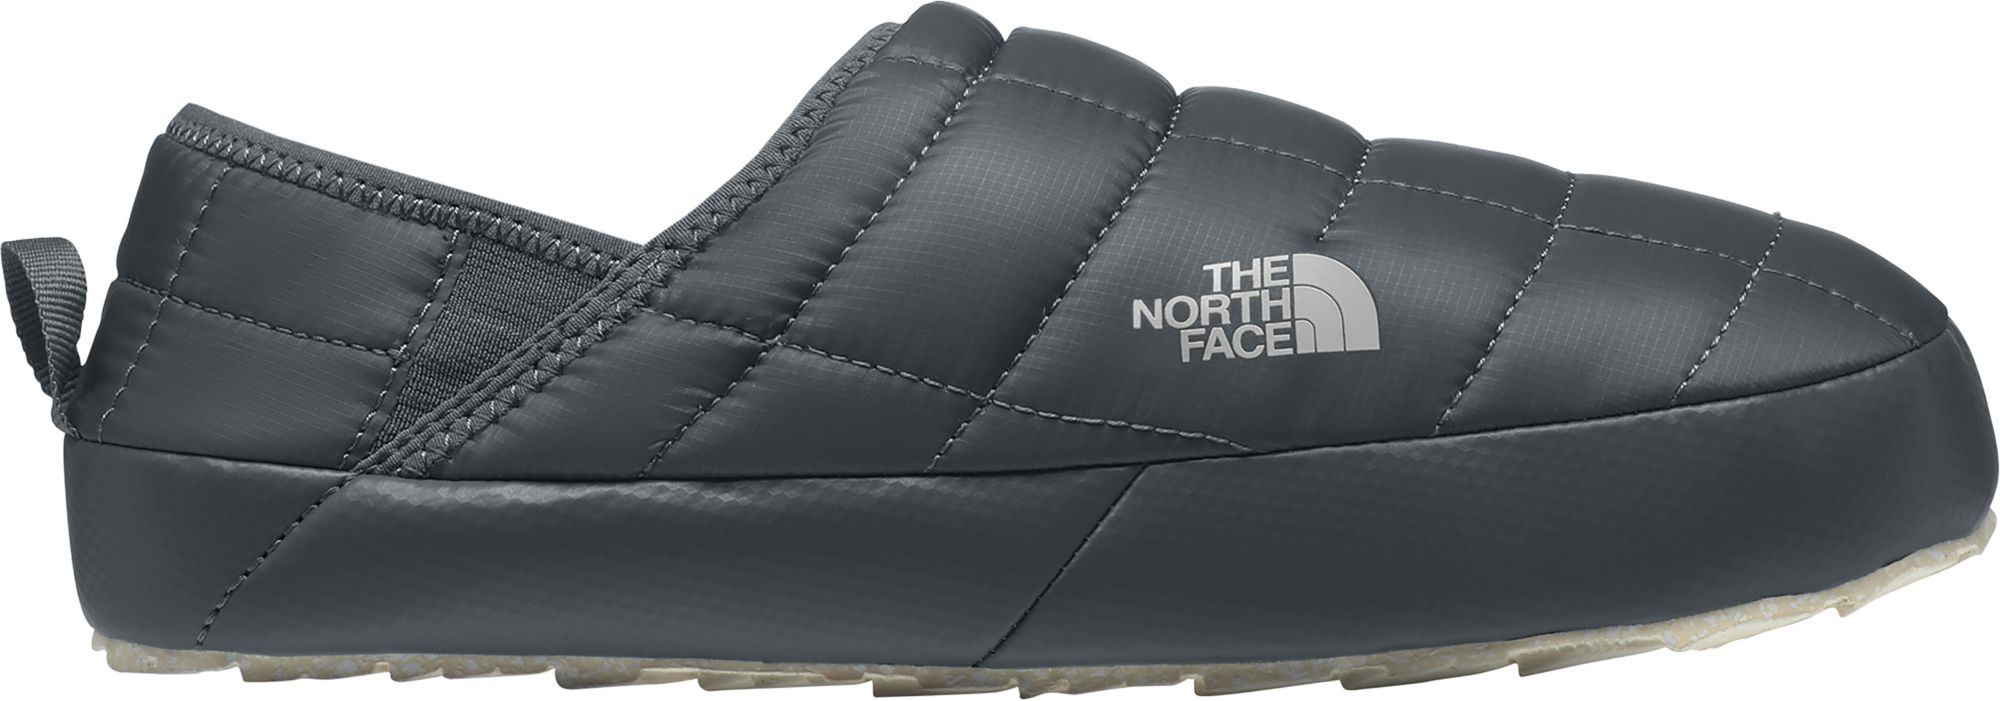 north face slippers womens